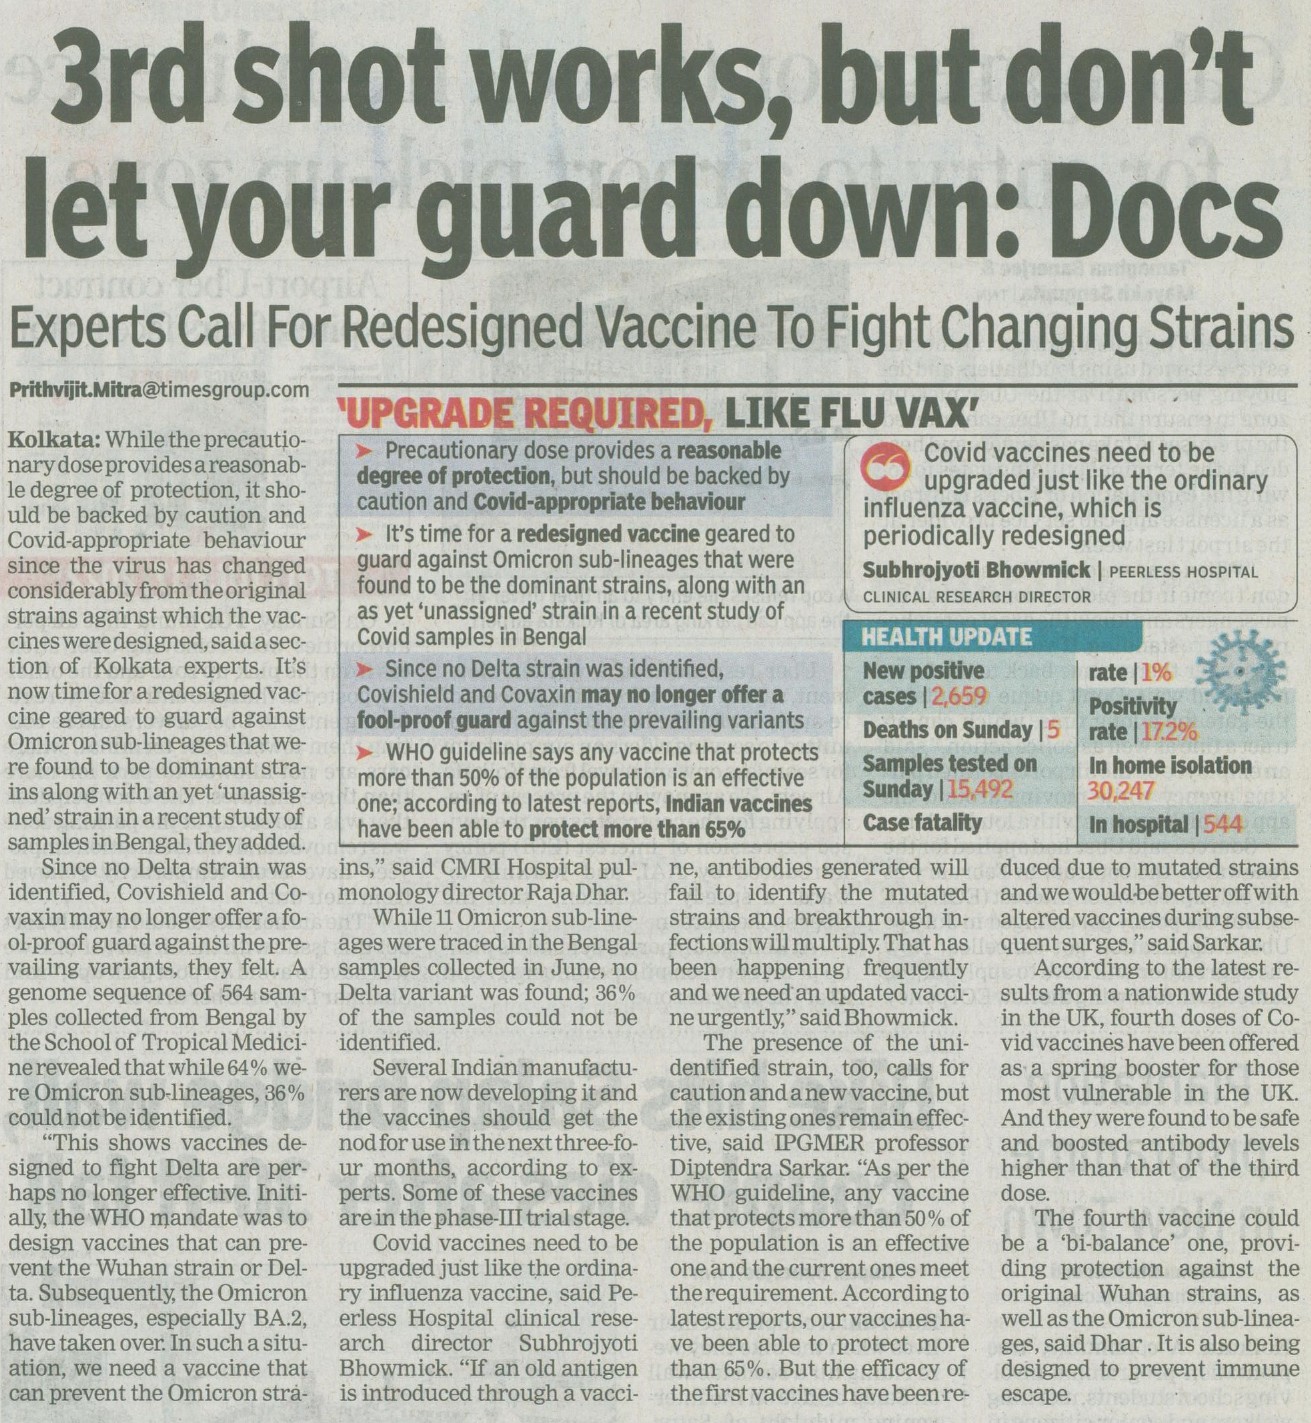 3rd shot works but dont let your guard down: Docs